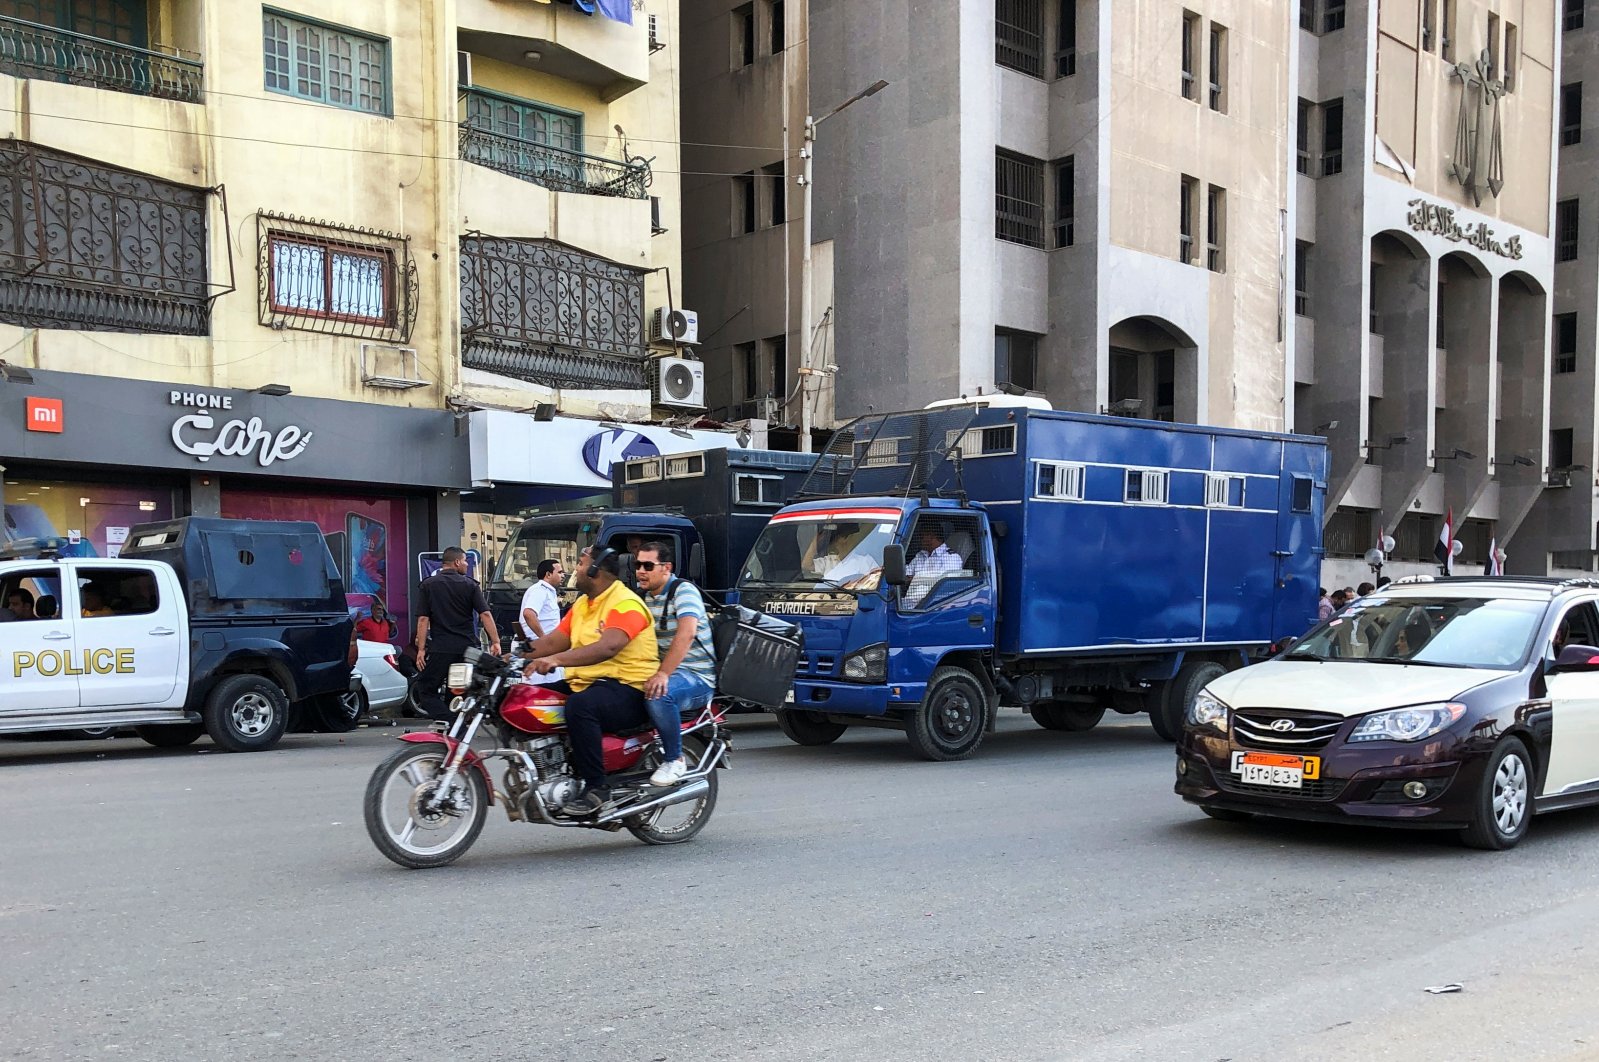 Vehicles are seen in traffic in Egypt's Mansura on Sept. 28, 2021. (Reuters File Photo)